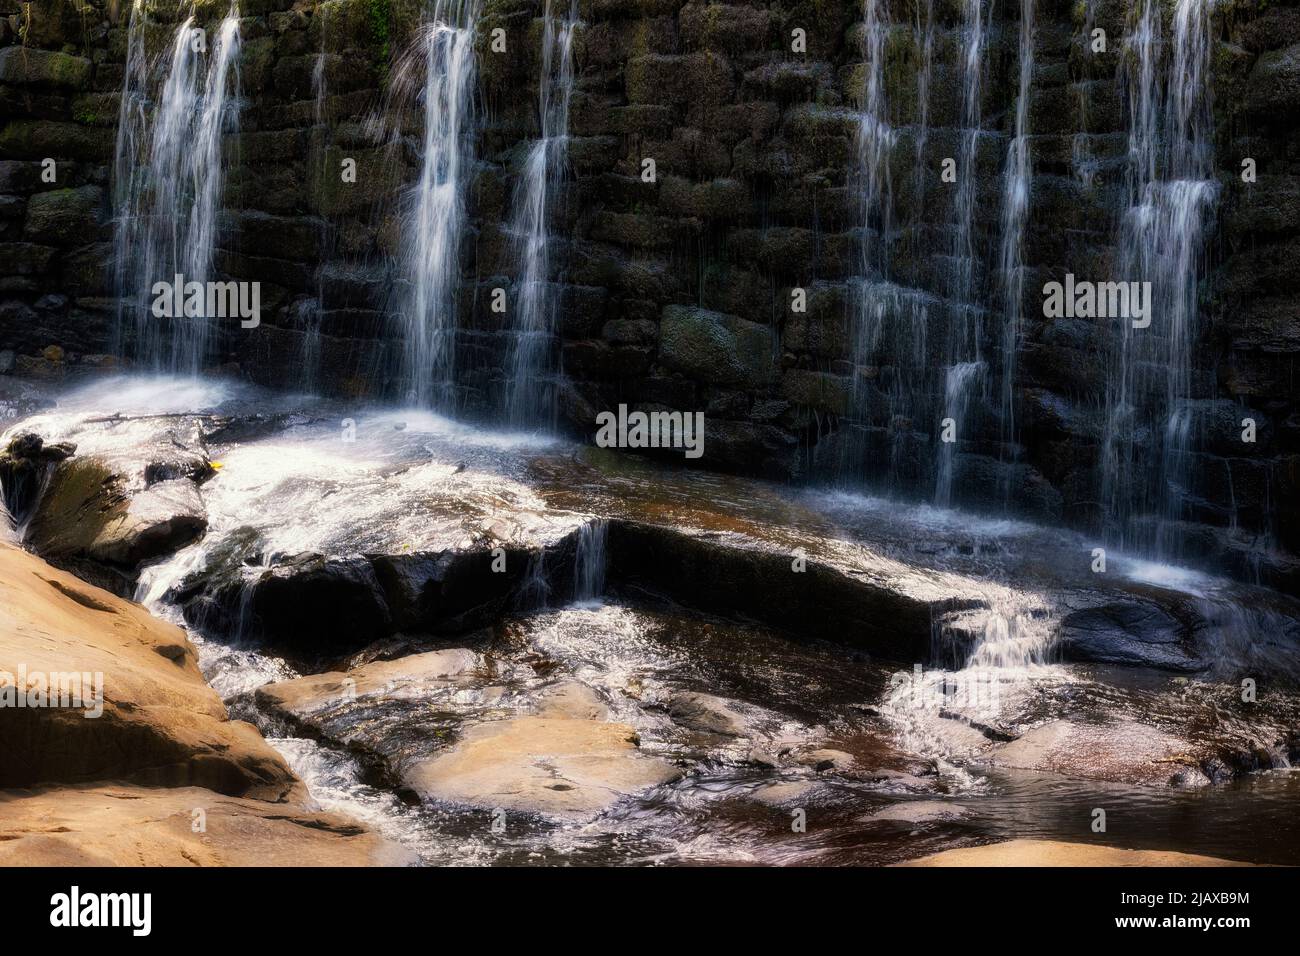 Water spills over rock dam onto the rocks below at Yates Mill County Park in North Carolina. Stock Photo